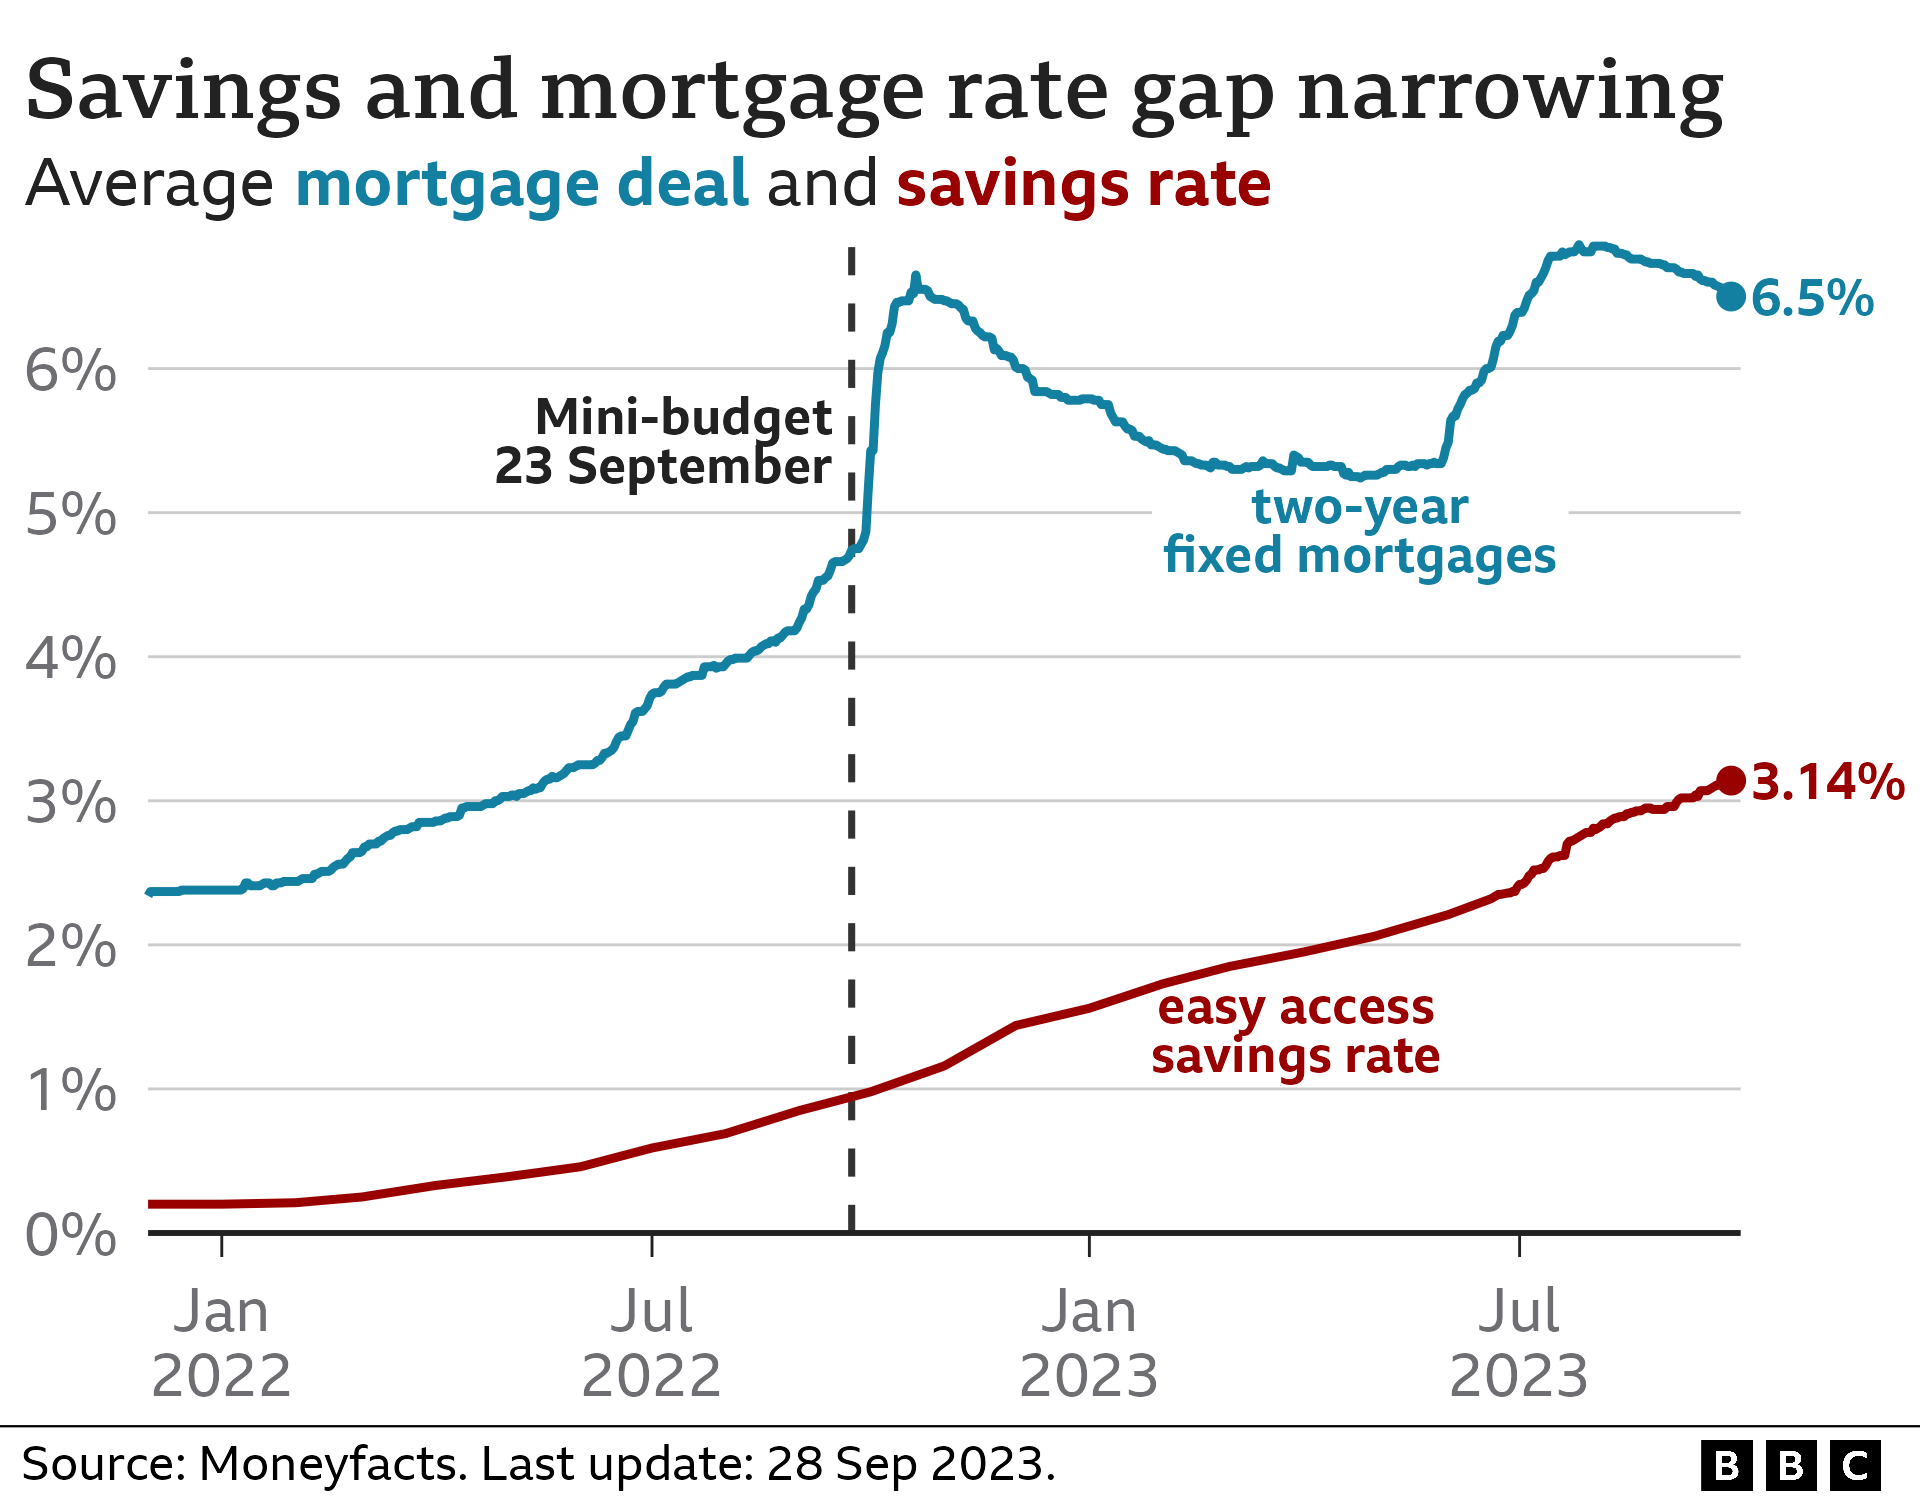 Charting showing mortgage rates and savings rates